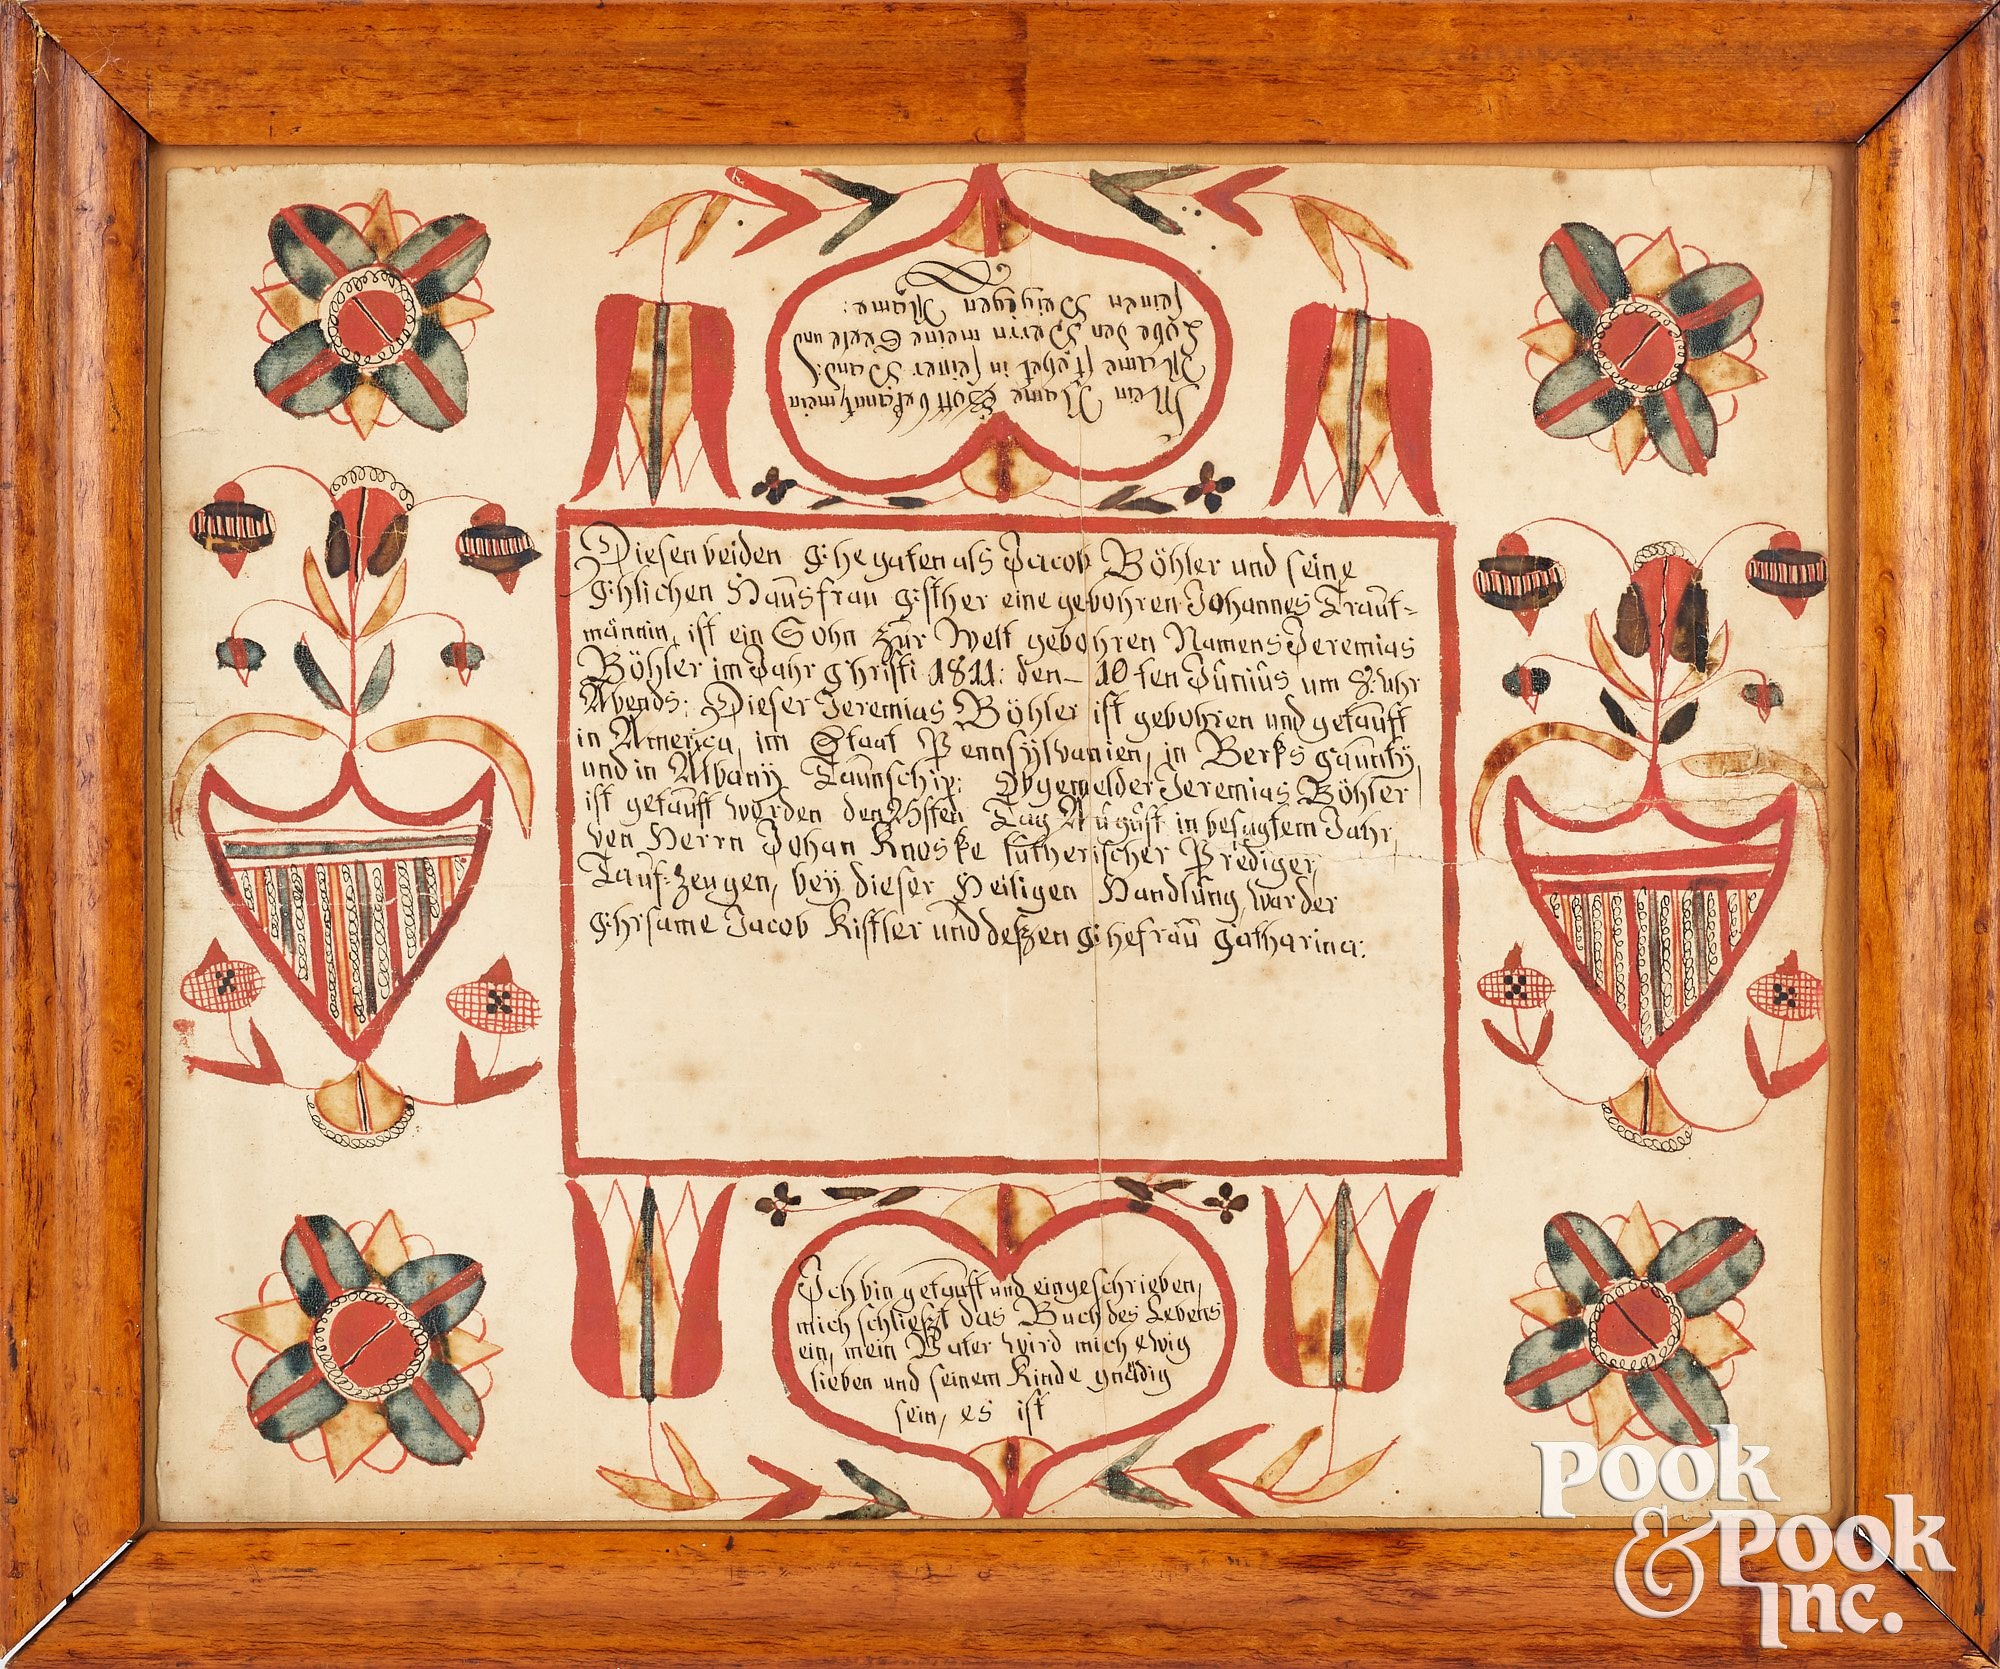 Artwork by Martin Brechall, Martin Brechall fraktur birth certificate, Made of ink and watercolor